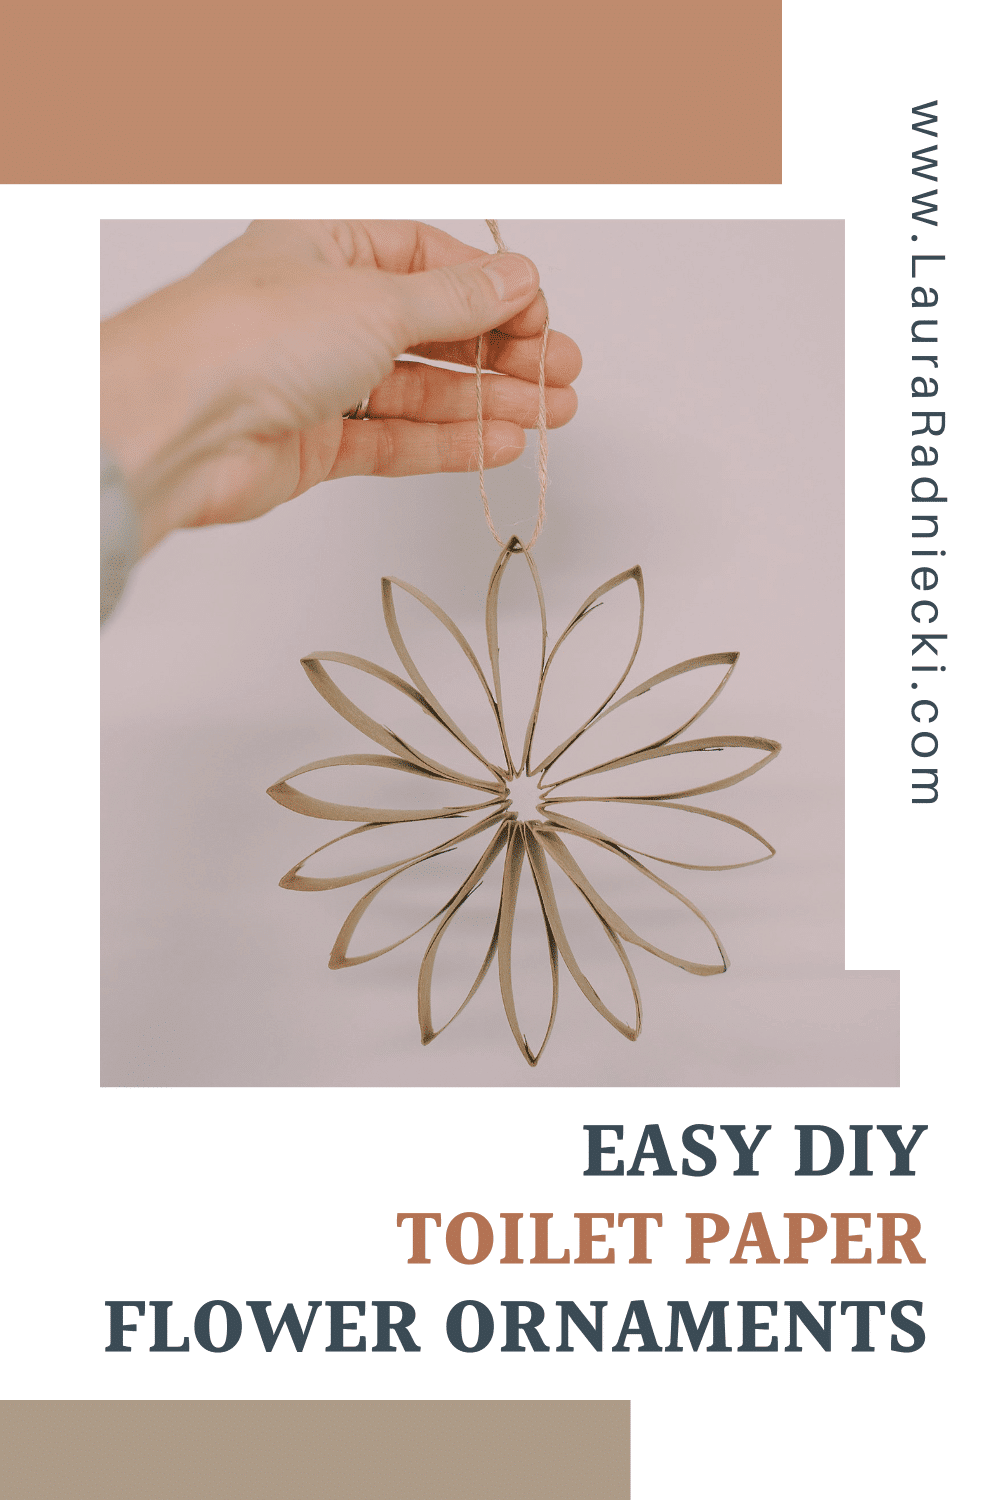 How to Make Toilet Paper Flower Ornaments